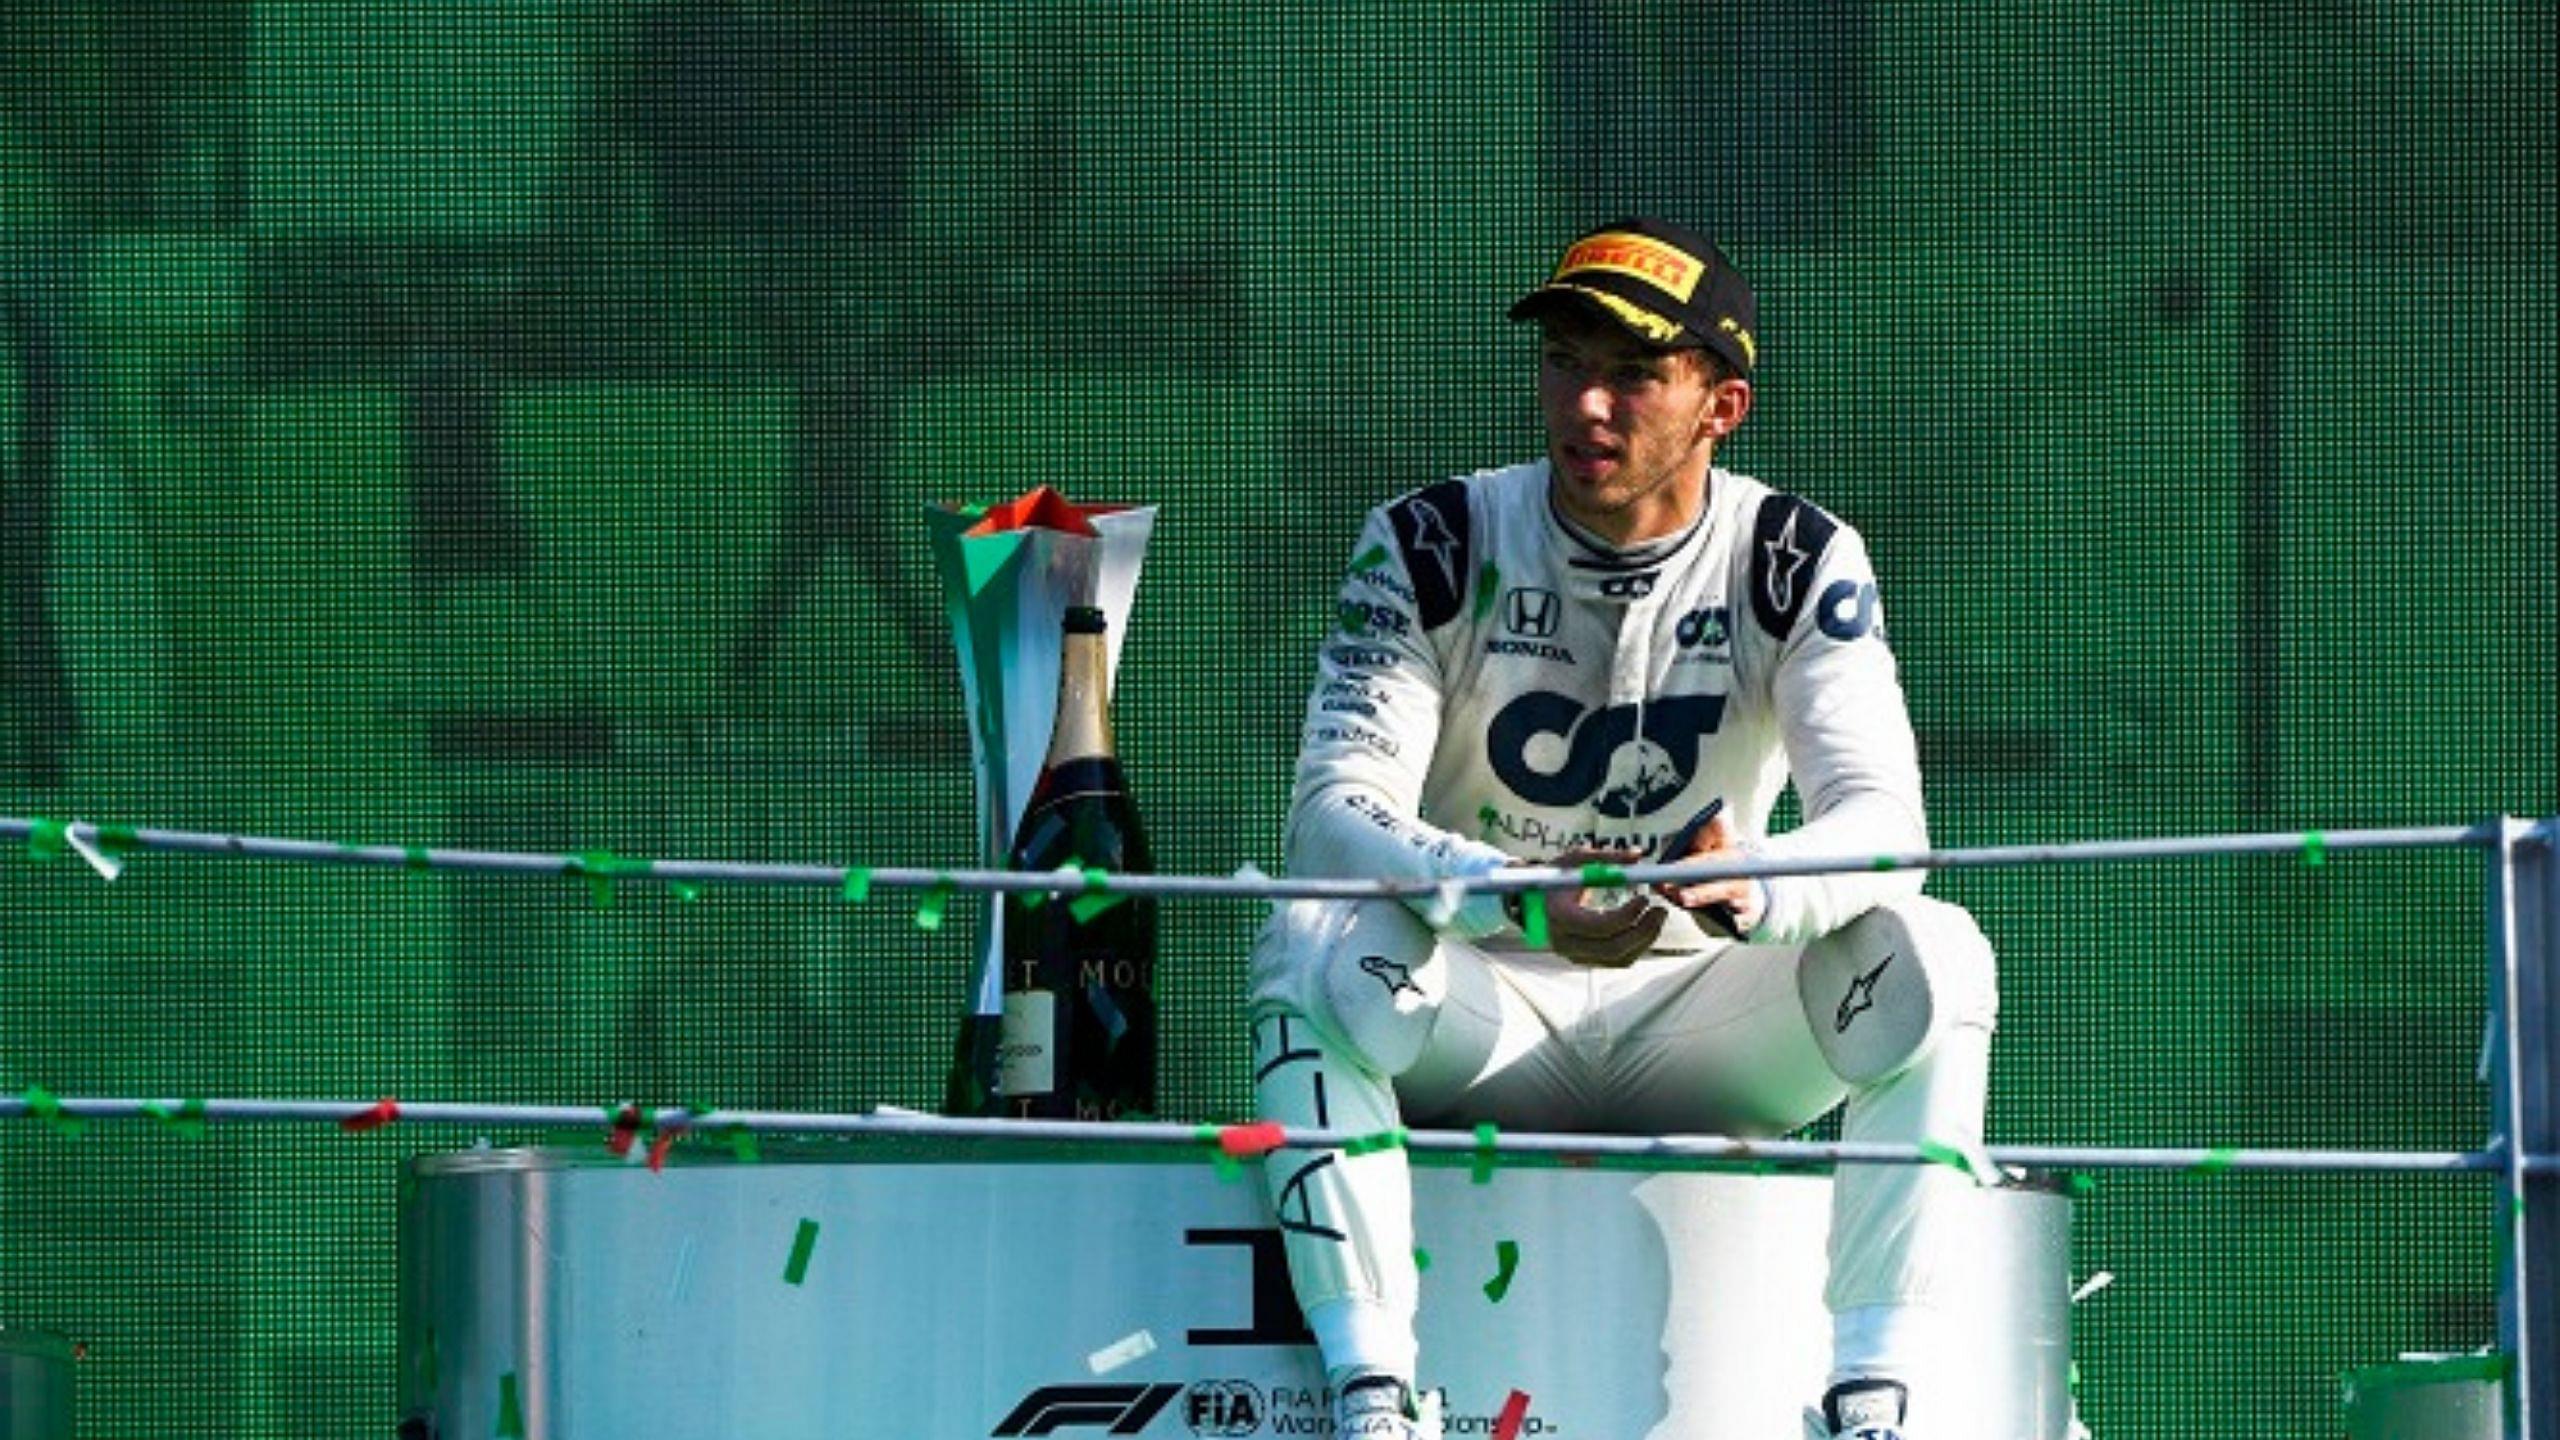 “Watching Pierre win in Monza was my highlight of this season” - Karun Chandhok wants Pierre Gasly to impress further next season and launch himself into driver market